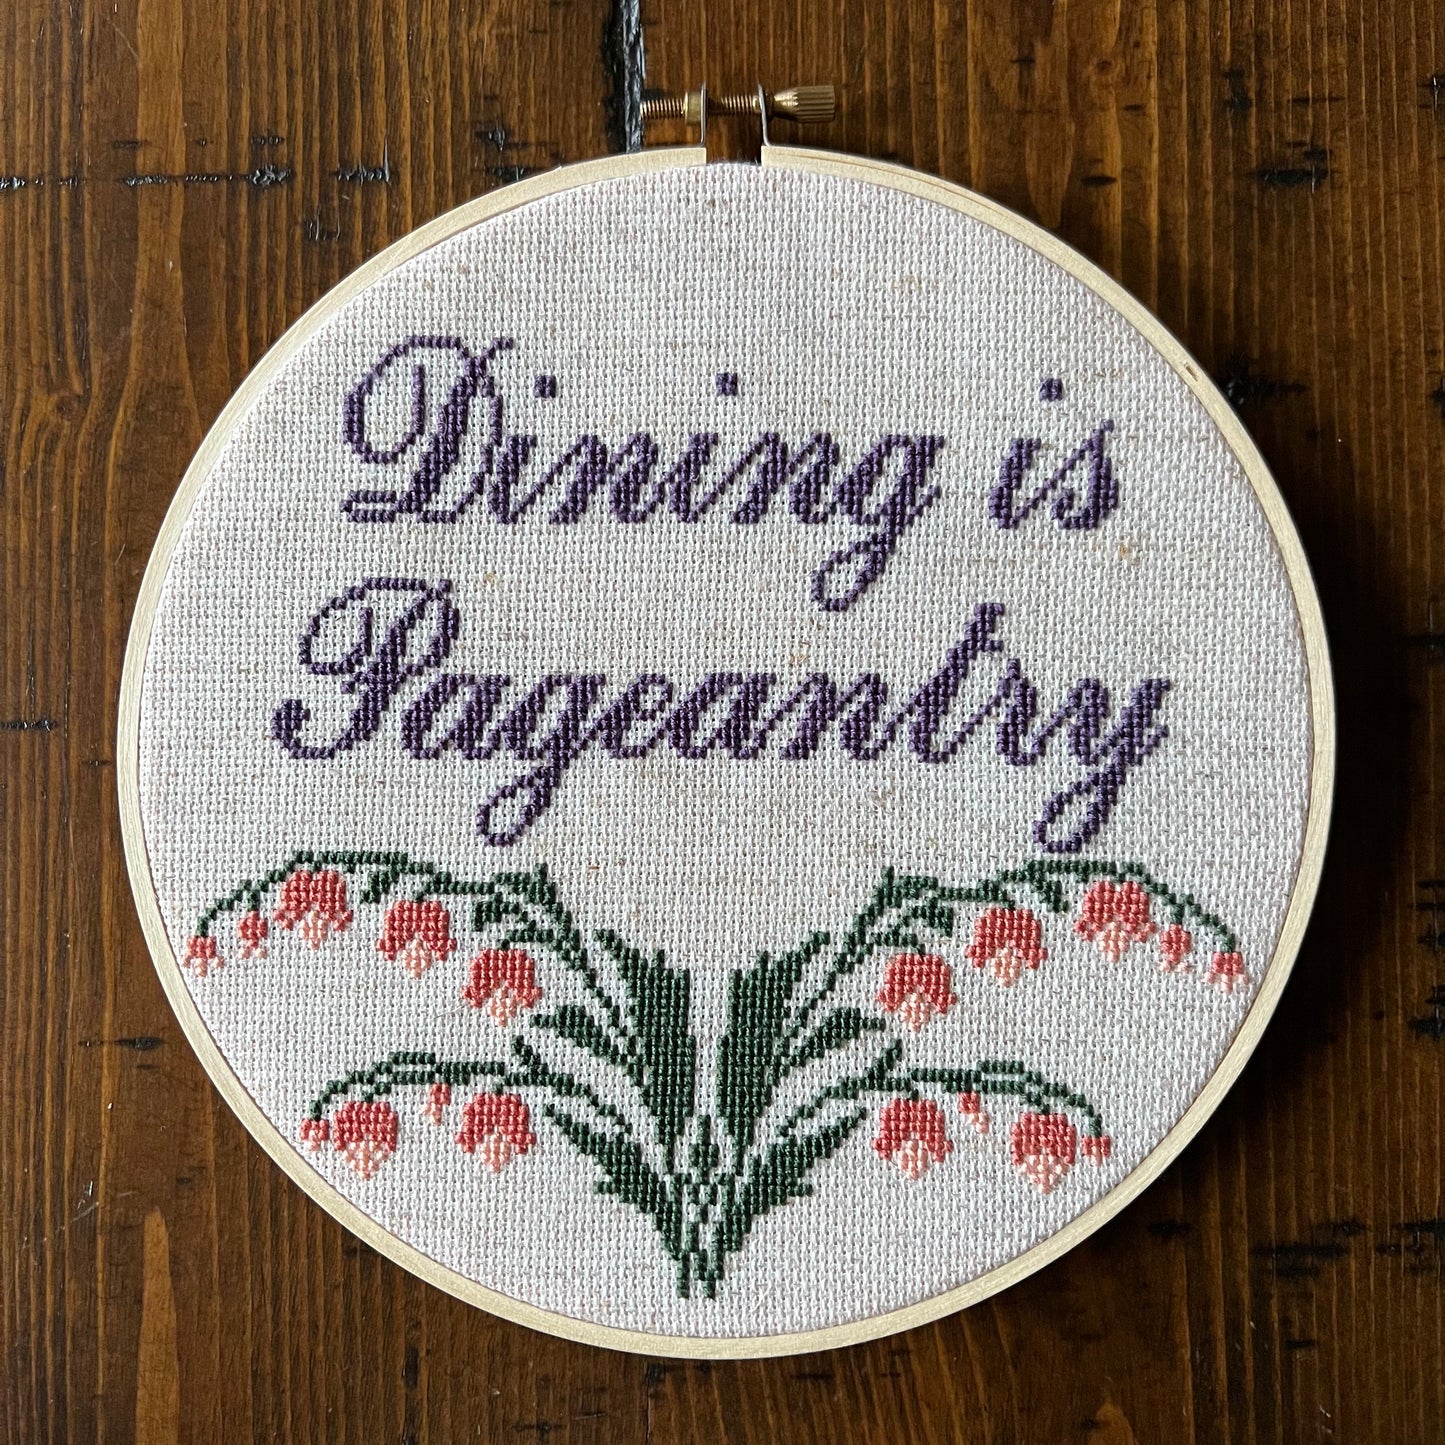 Dining Is Pageantry 7” Hand Stitched Cross Stitch Hoop